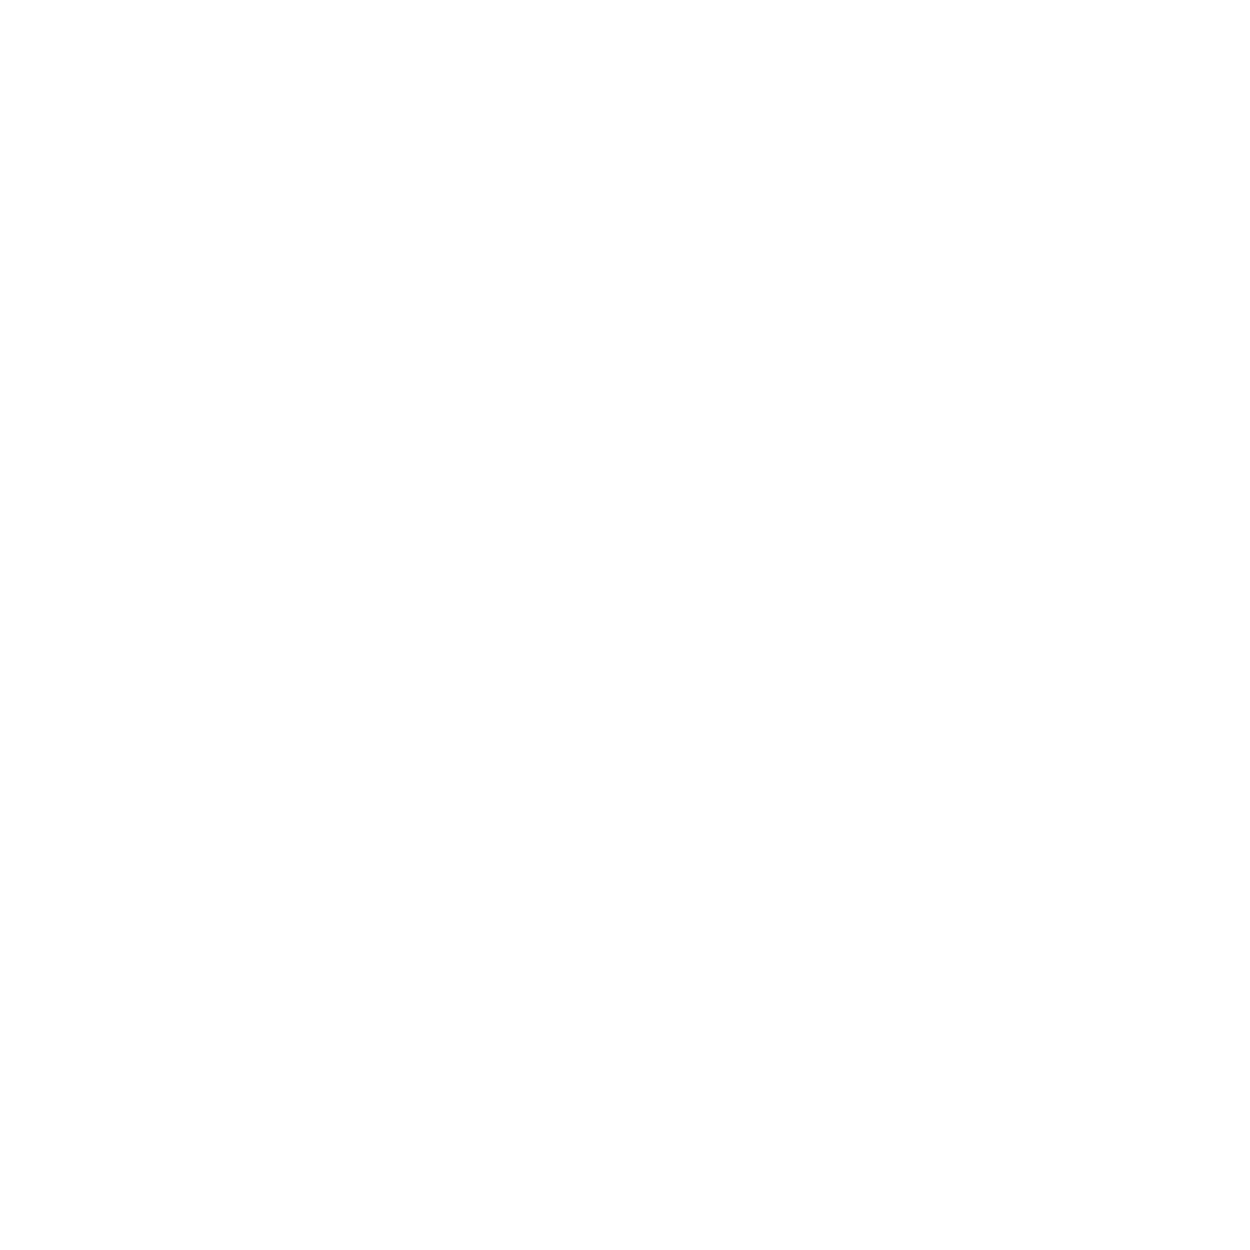 Empower Writing Services